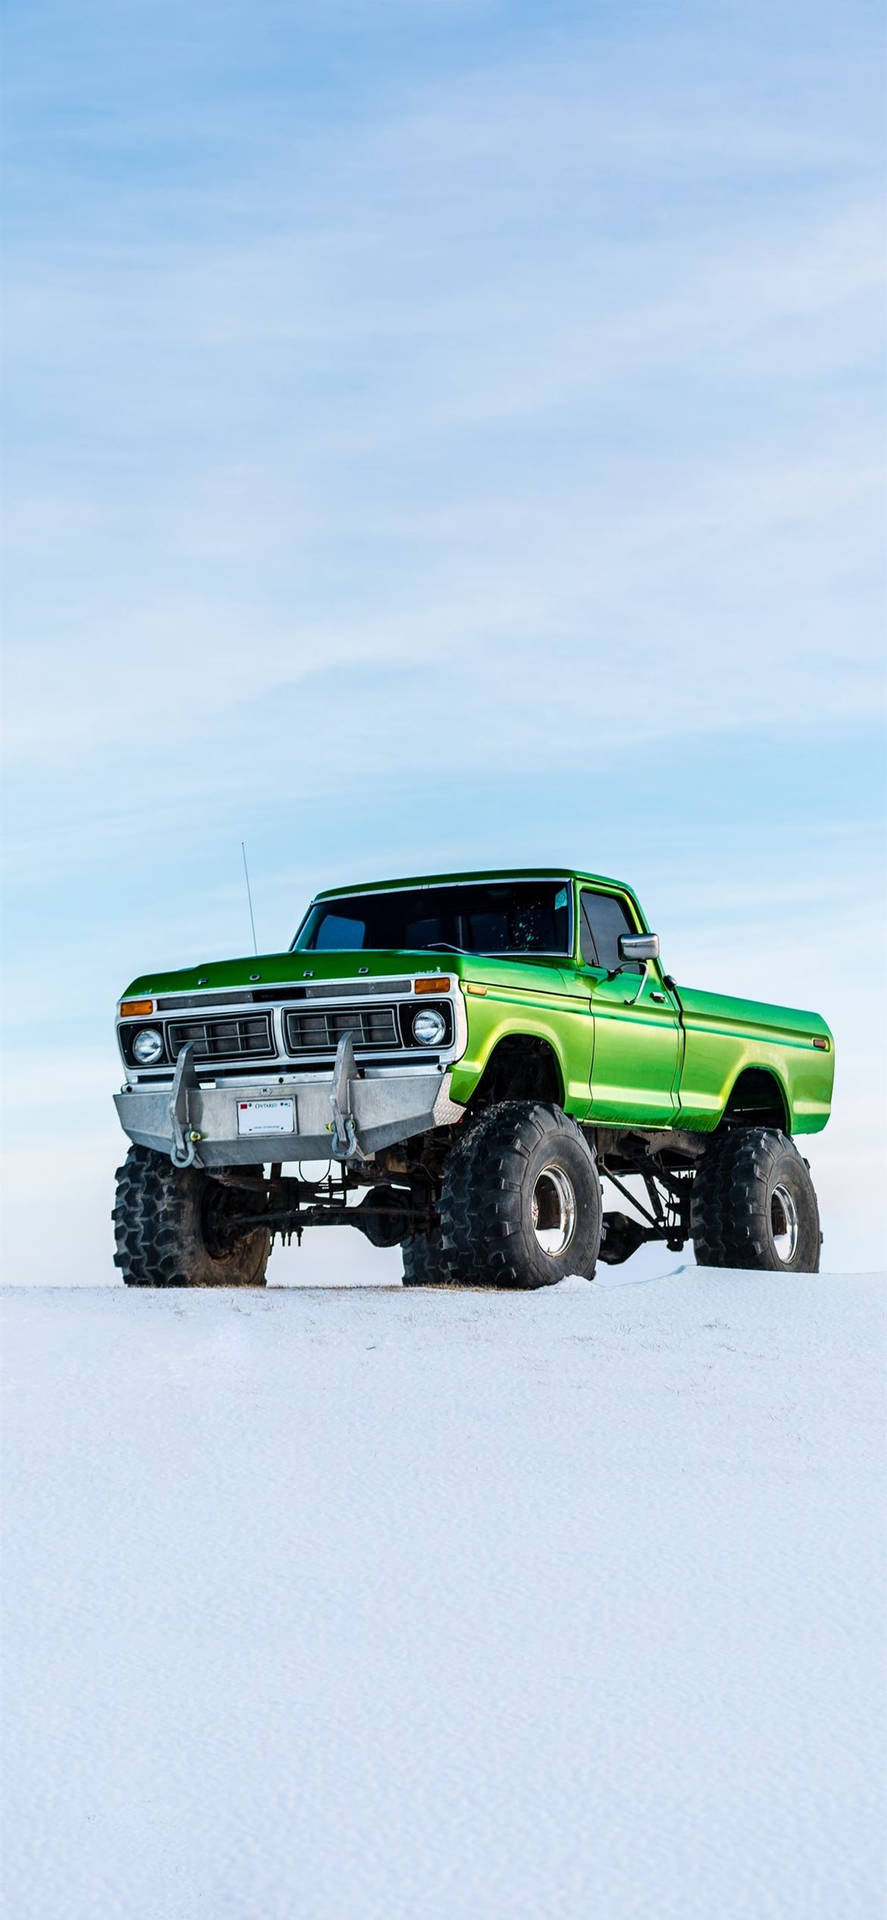 Majestic Green Off-road 4x4 Truck Background